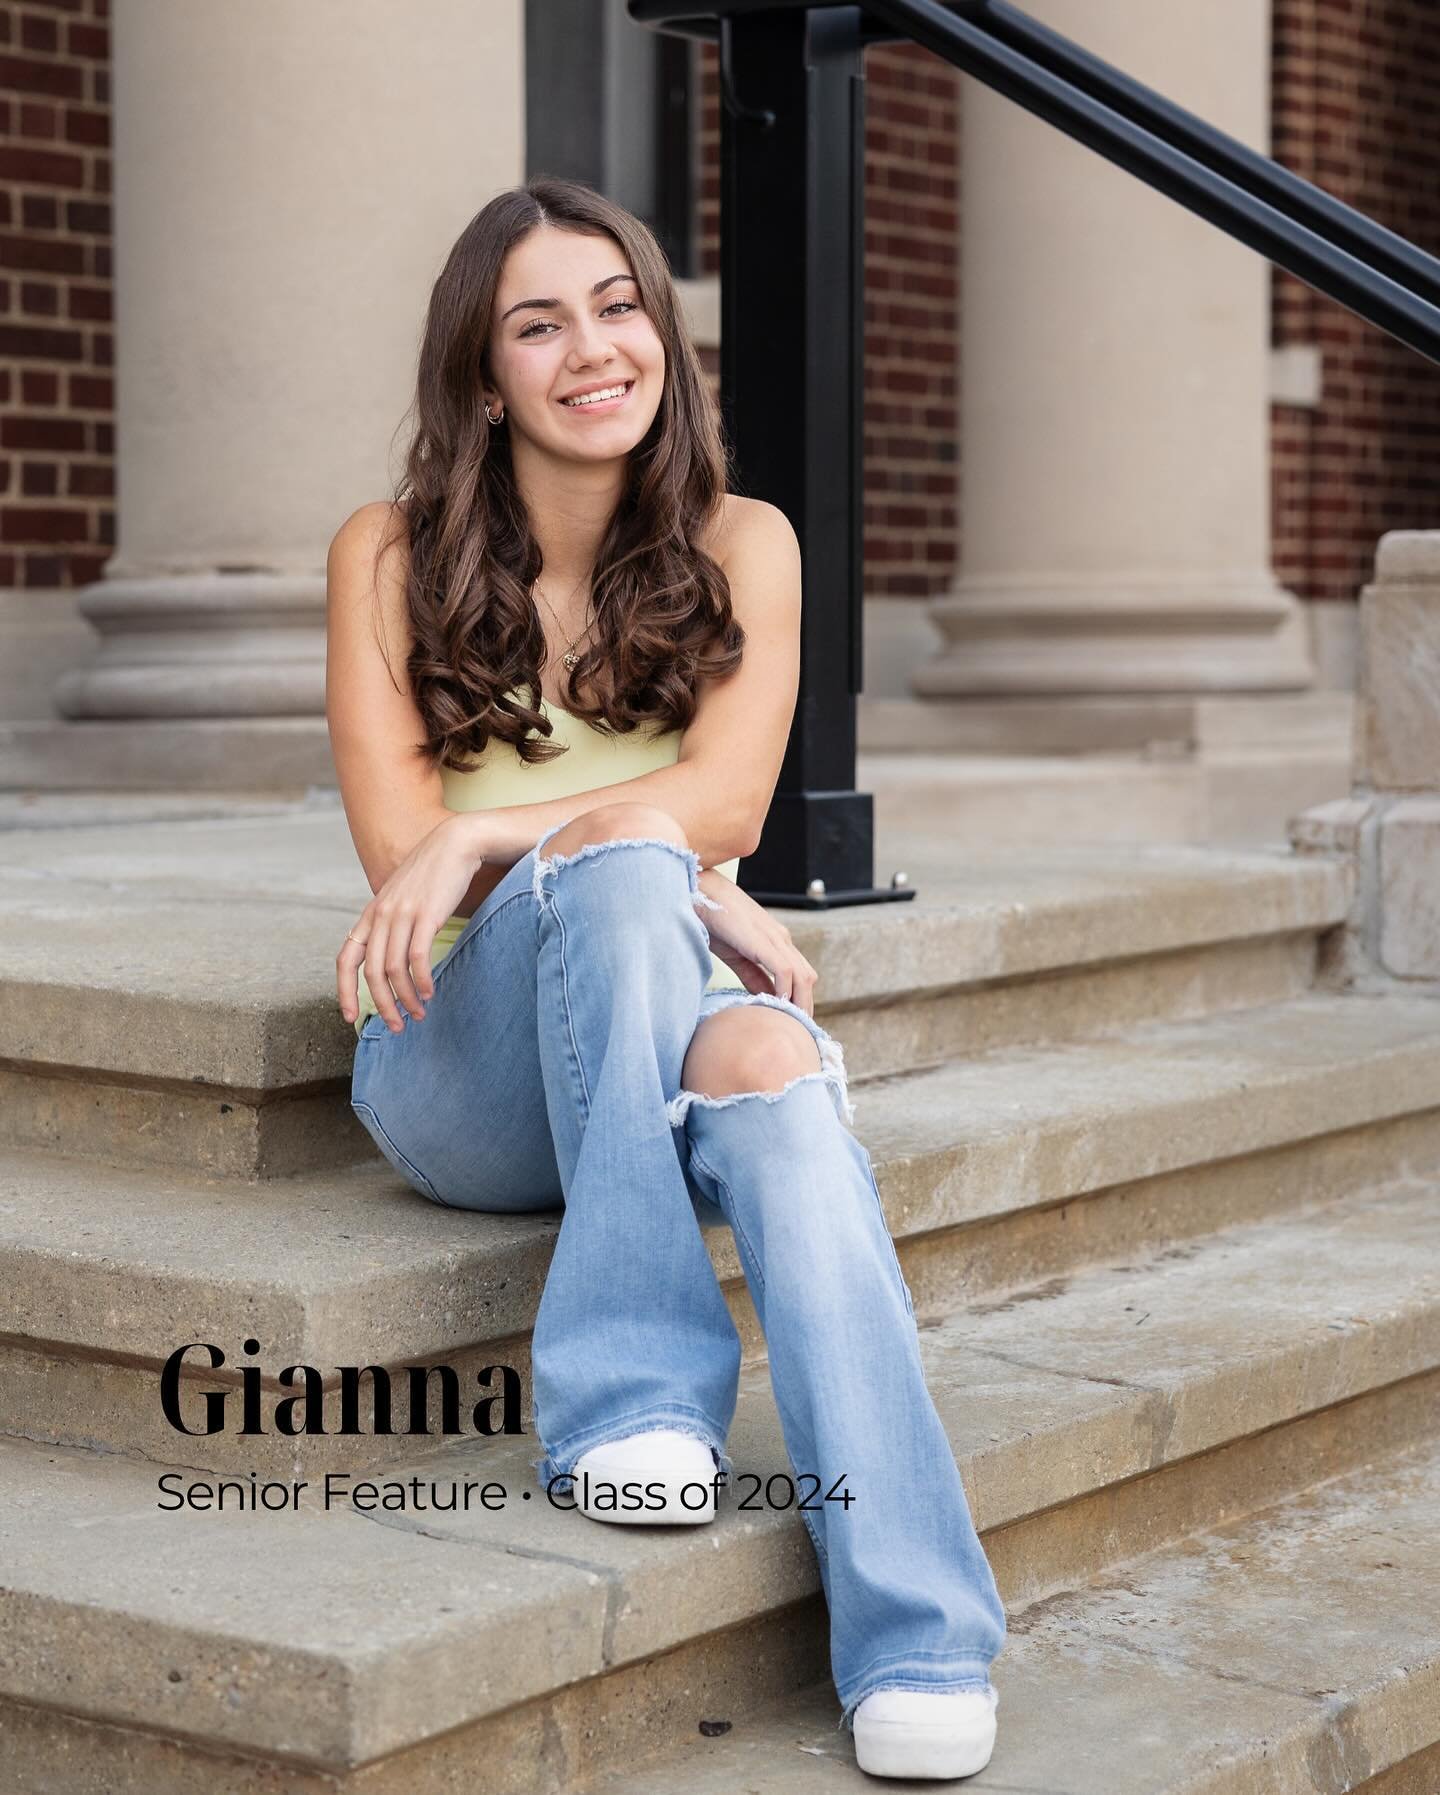 Gianna | Senior Feature | Class of 2024

Gianna&rsquo;s senior session in the historic gem of Woodstock, IL, was an absolute blast! 📸 We ventured through the town square, soaking in the quaint vibes and vibrant energy that make this place so special